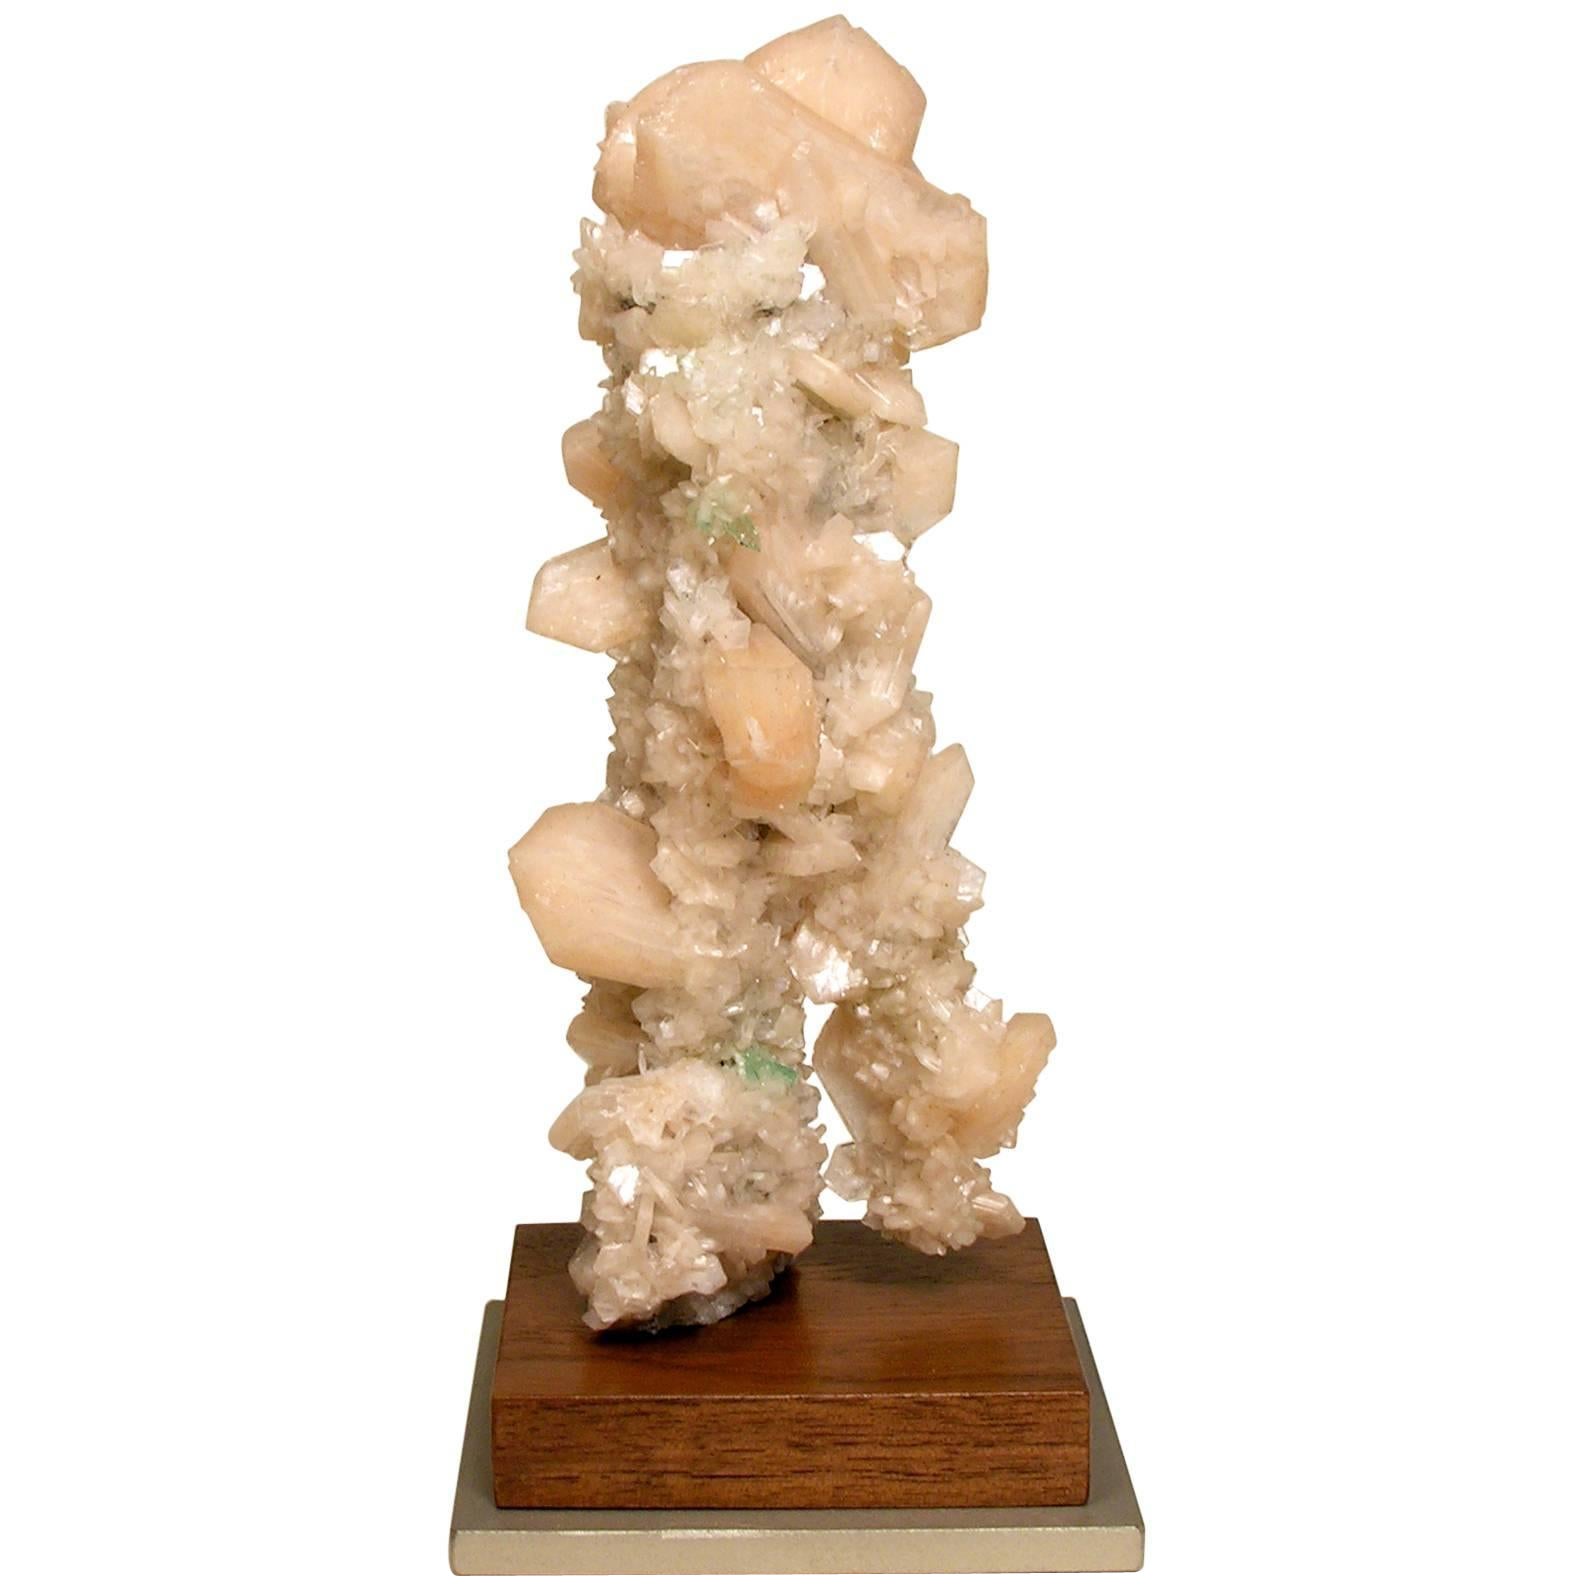 Naturally Formed Mineral Peach Stilbite on Apophyllite Sculpture For Sale